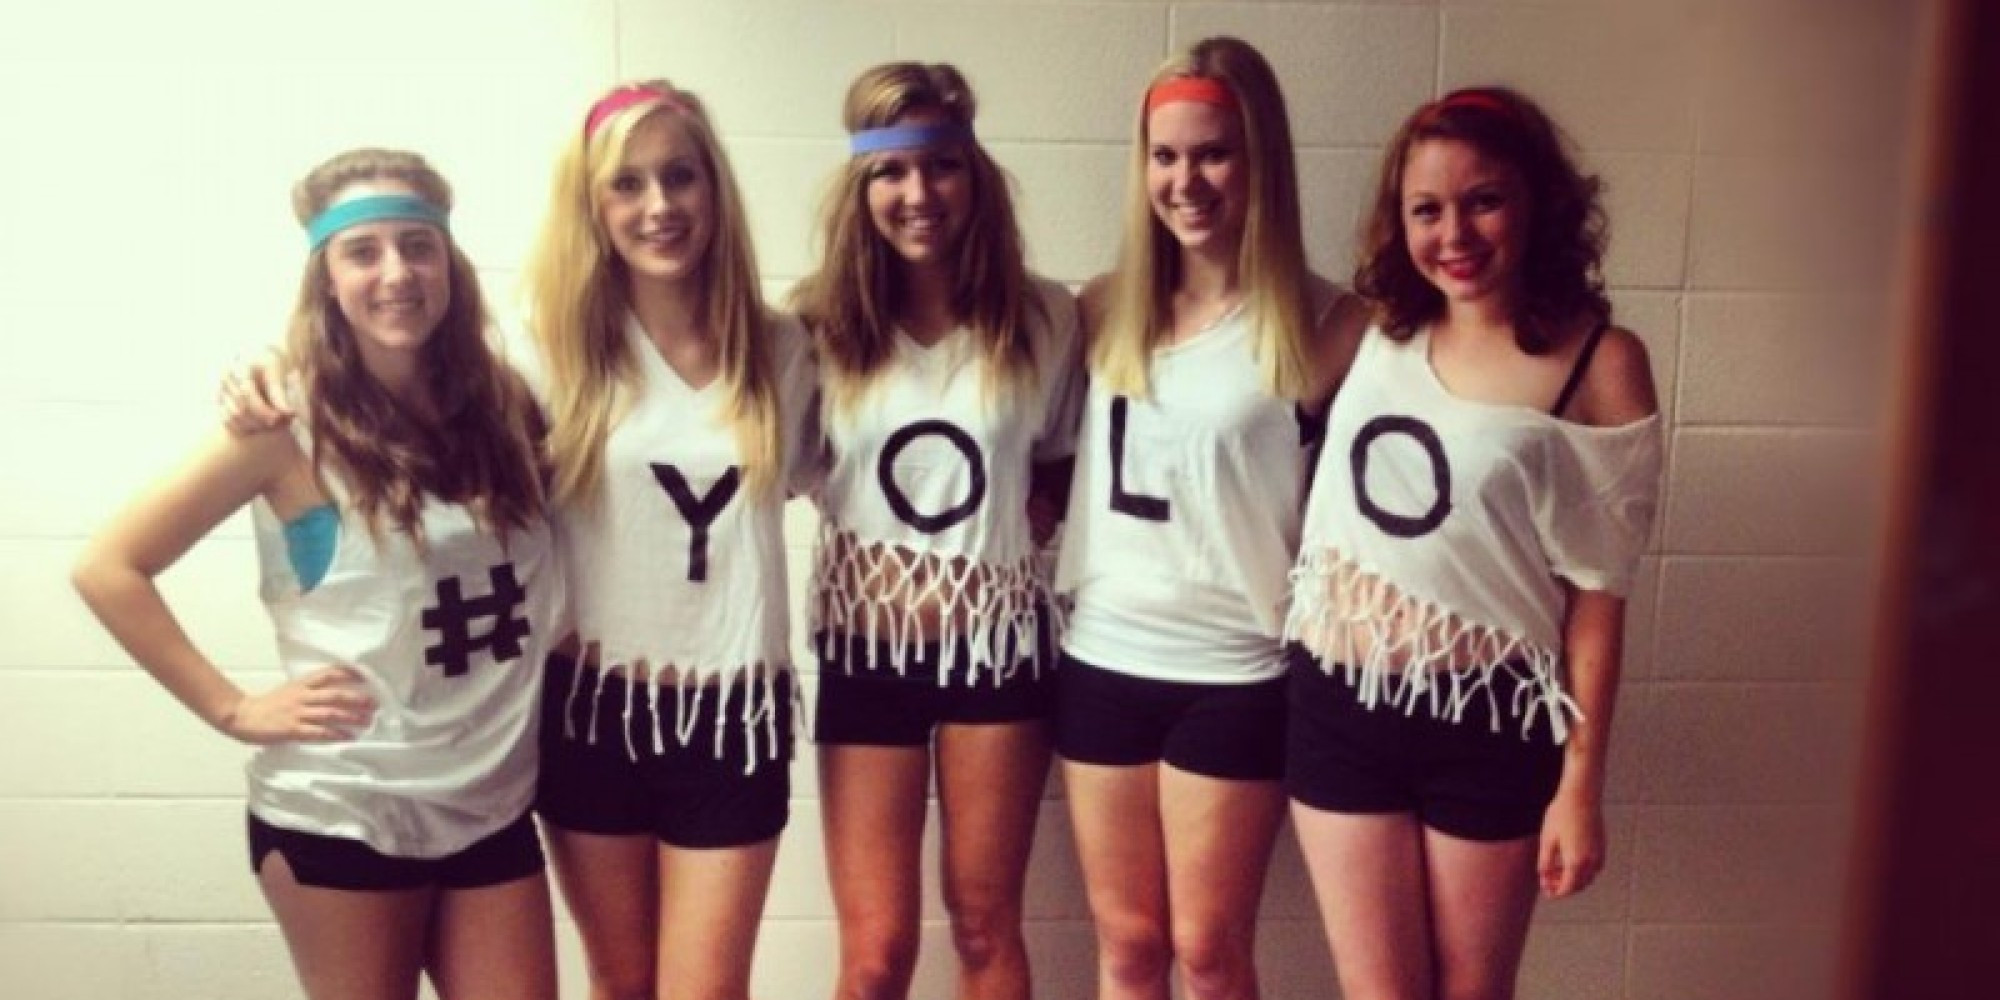 DIY Group Halloween Costume
 Group Costume Ideas That Are Cheap Easy And Totally DIY